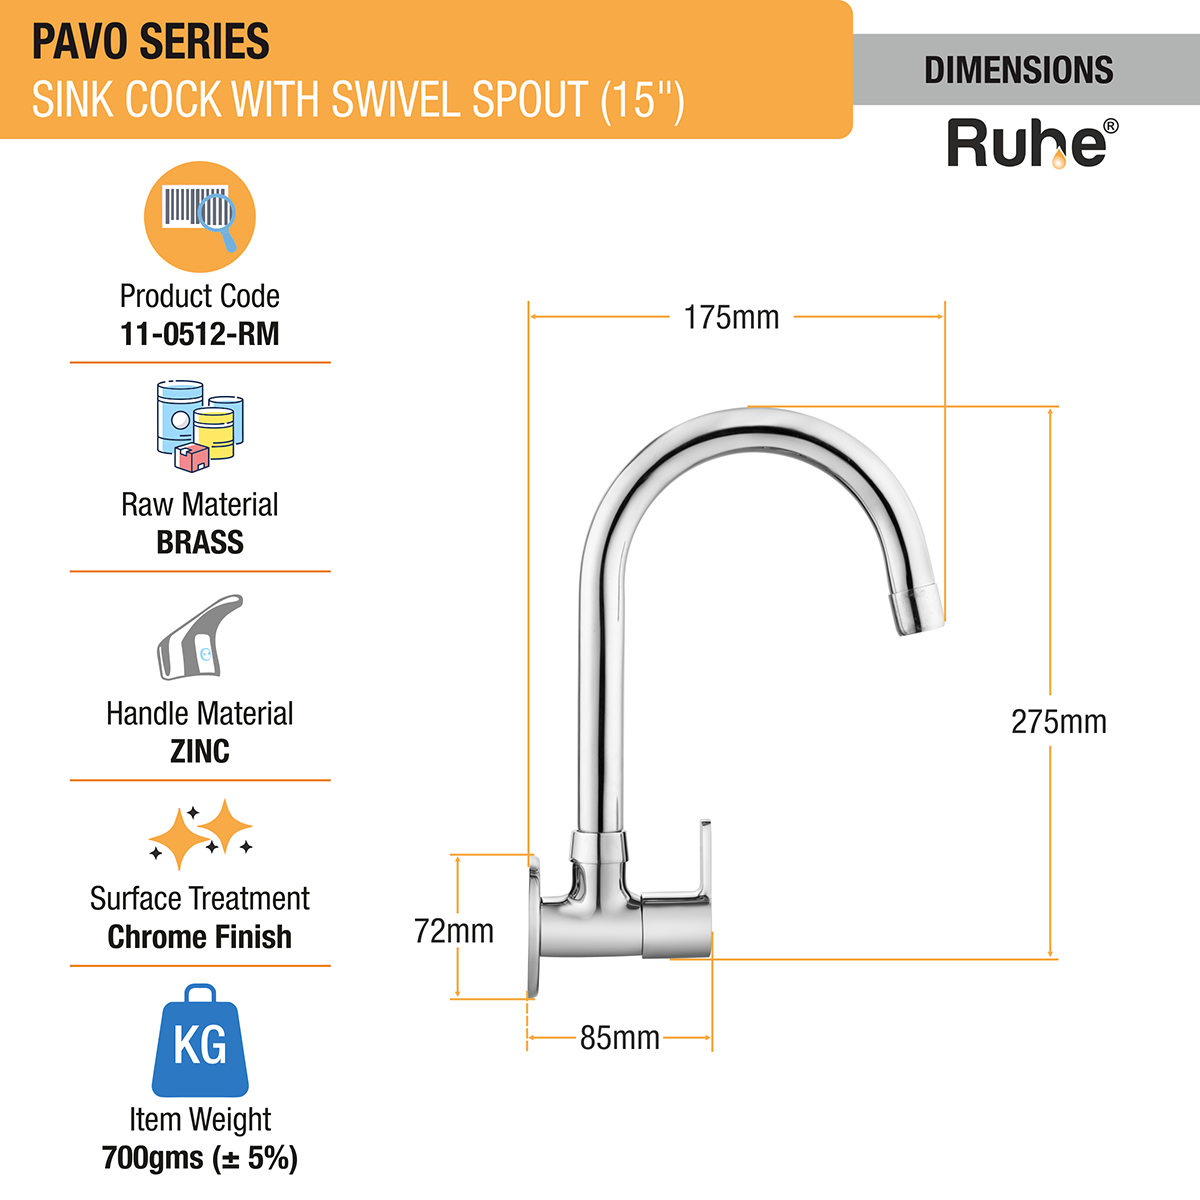 Pavo Sink Tap with Medium (15 inches) Round Swivel Spout Brass Faucet dimensions and size